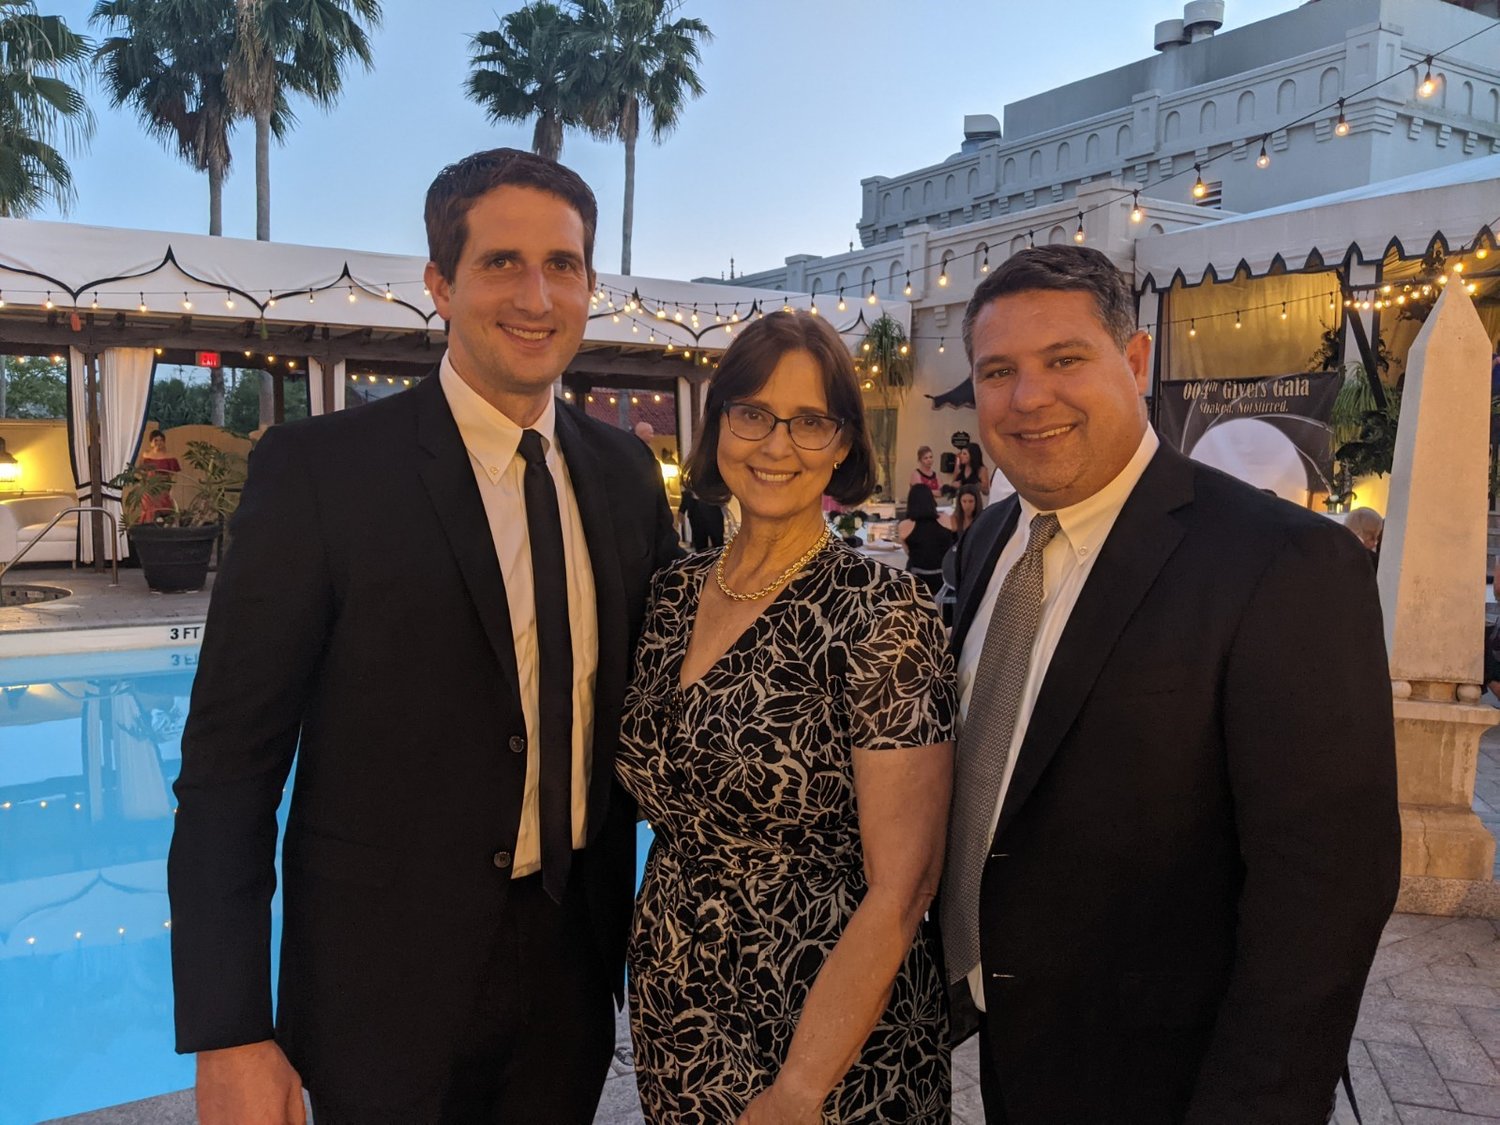 St. Johns County Clerk of Court Brandon Patty, state Rep. Cyndi Stephenson and state Sen. Travis Hutson attend the May 7 fundraiser in St. Augustine.